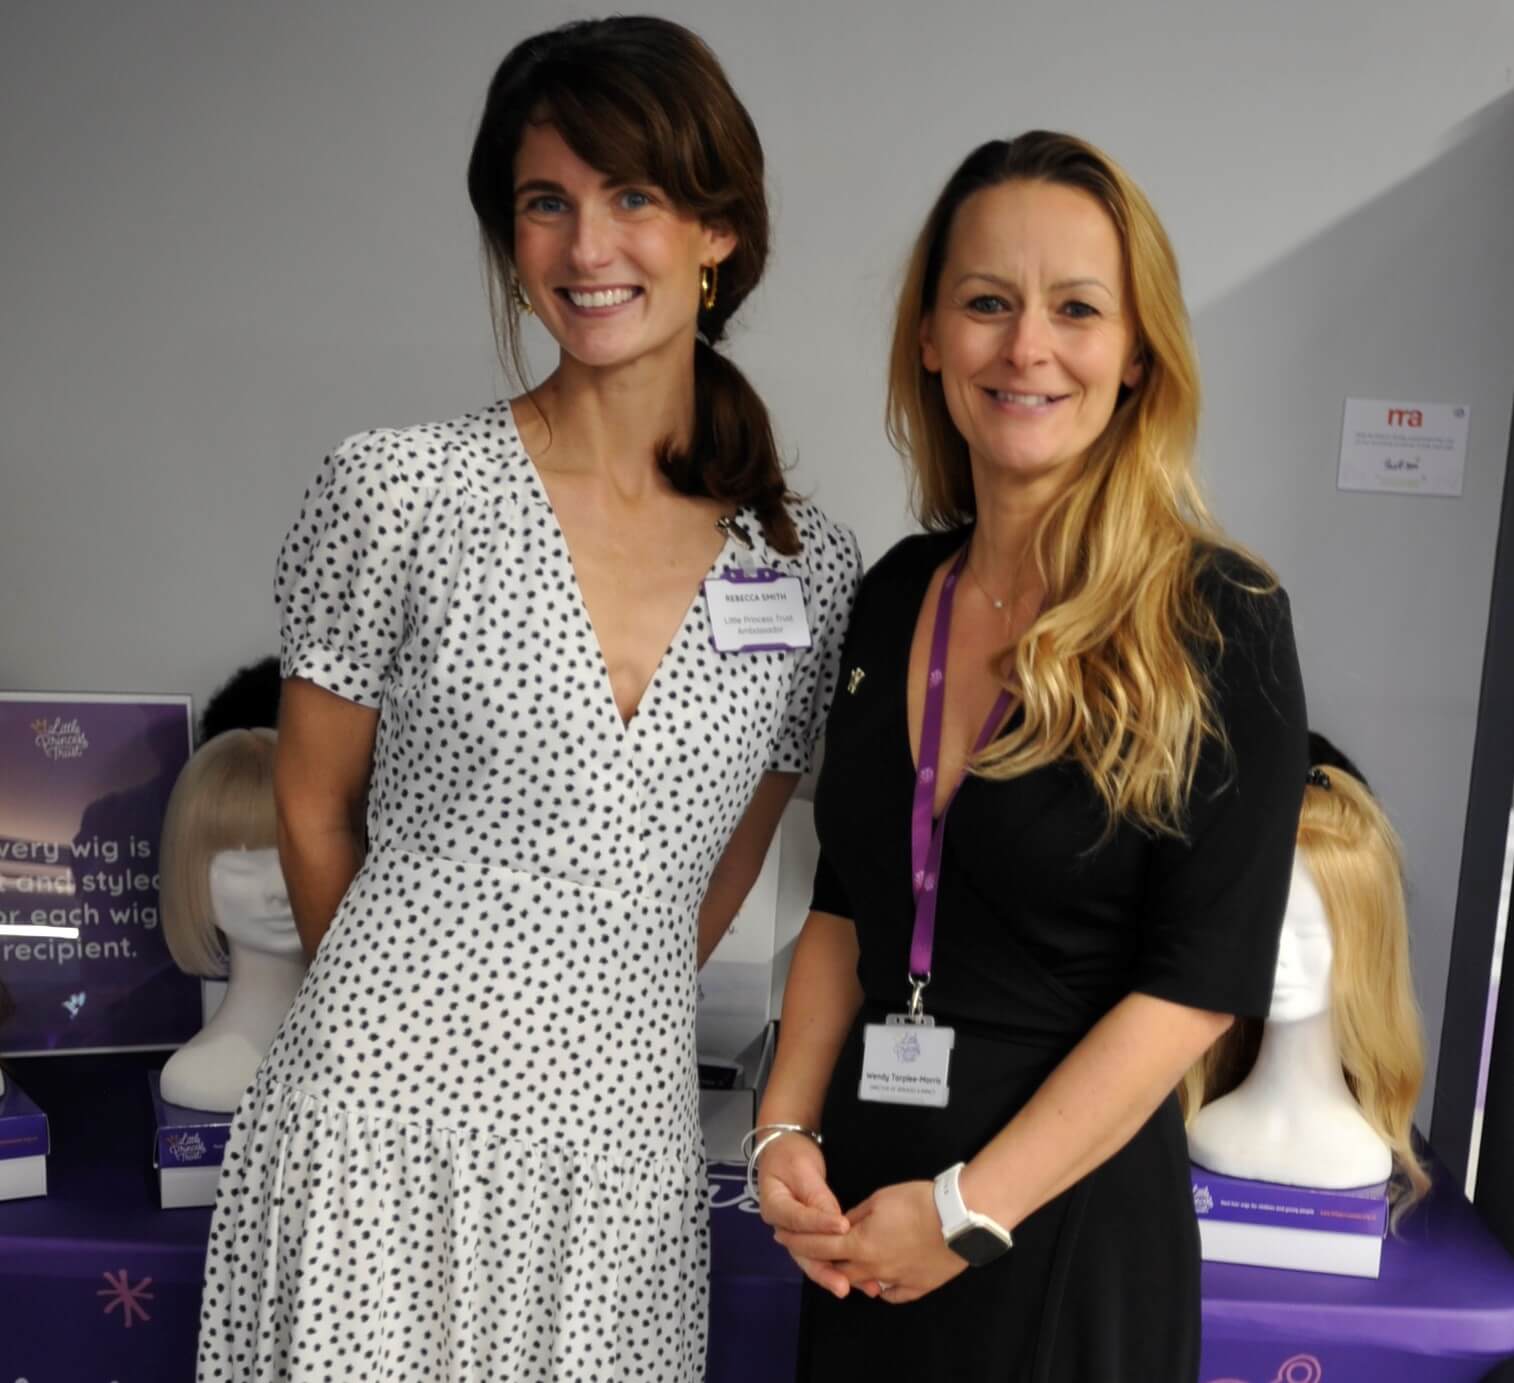 Rebecca Smith with Little Princess Trust founder Wendy Tarplee-Morris.